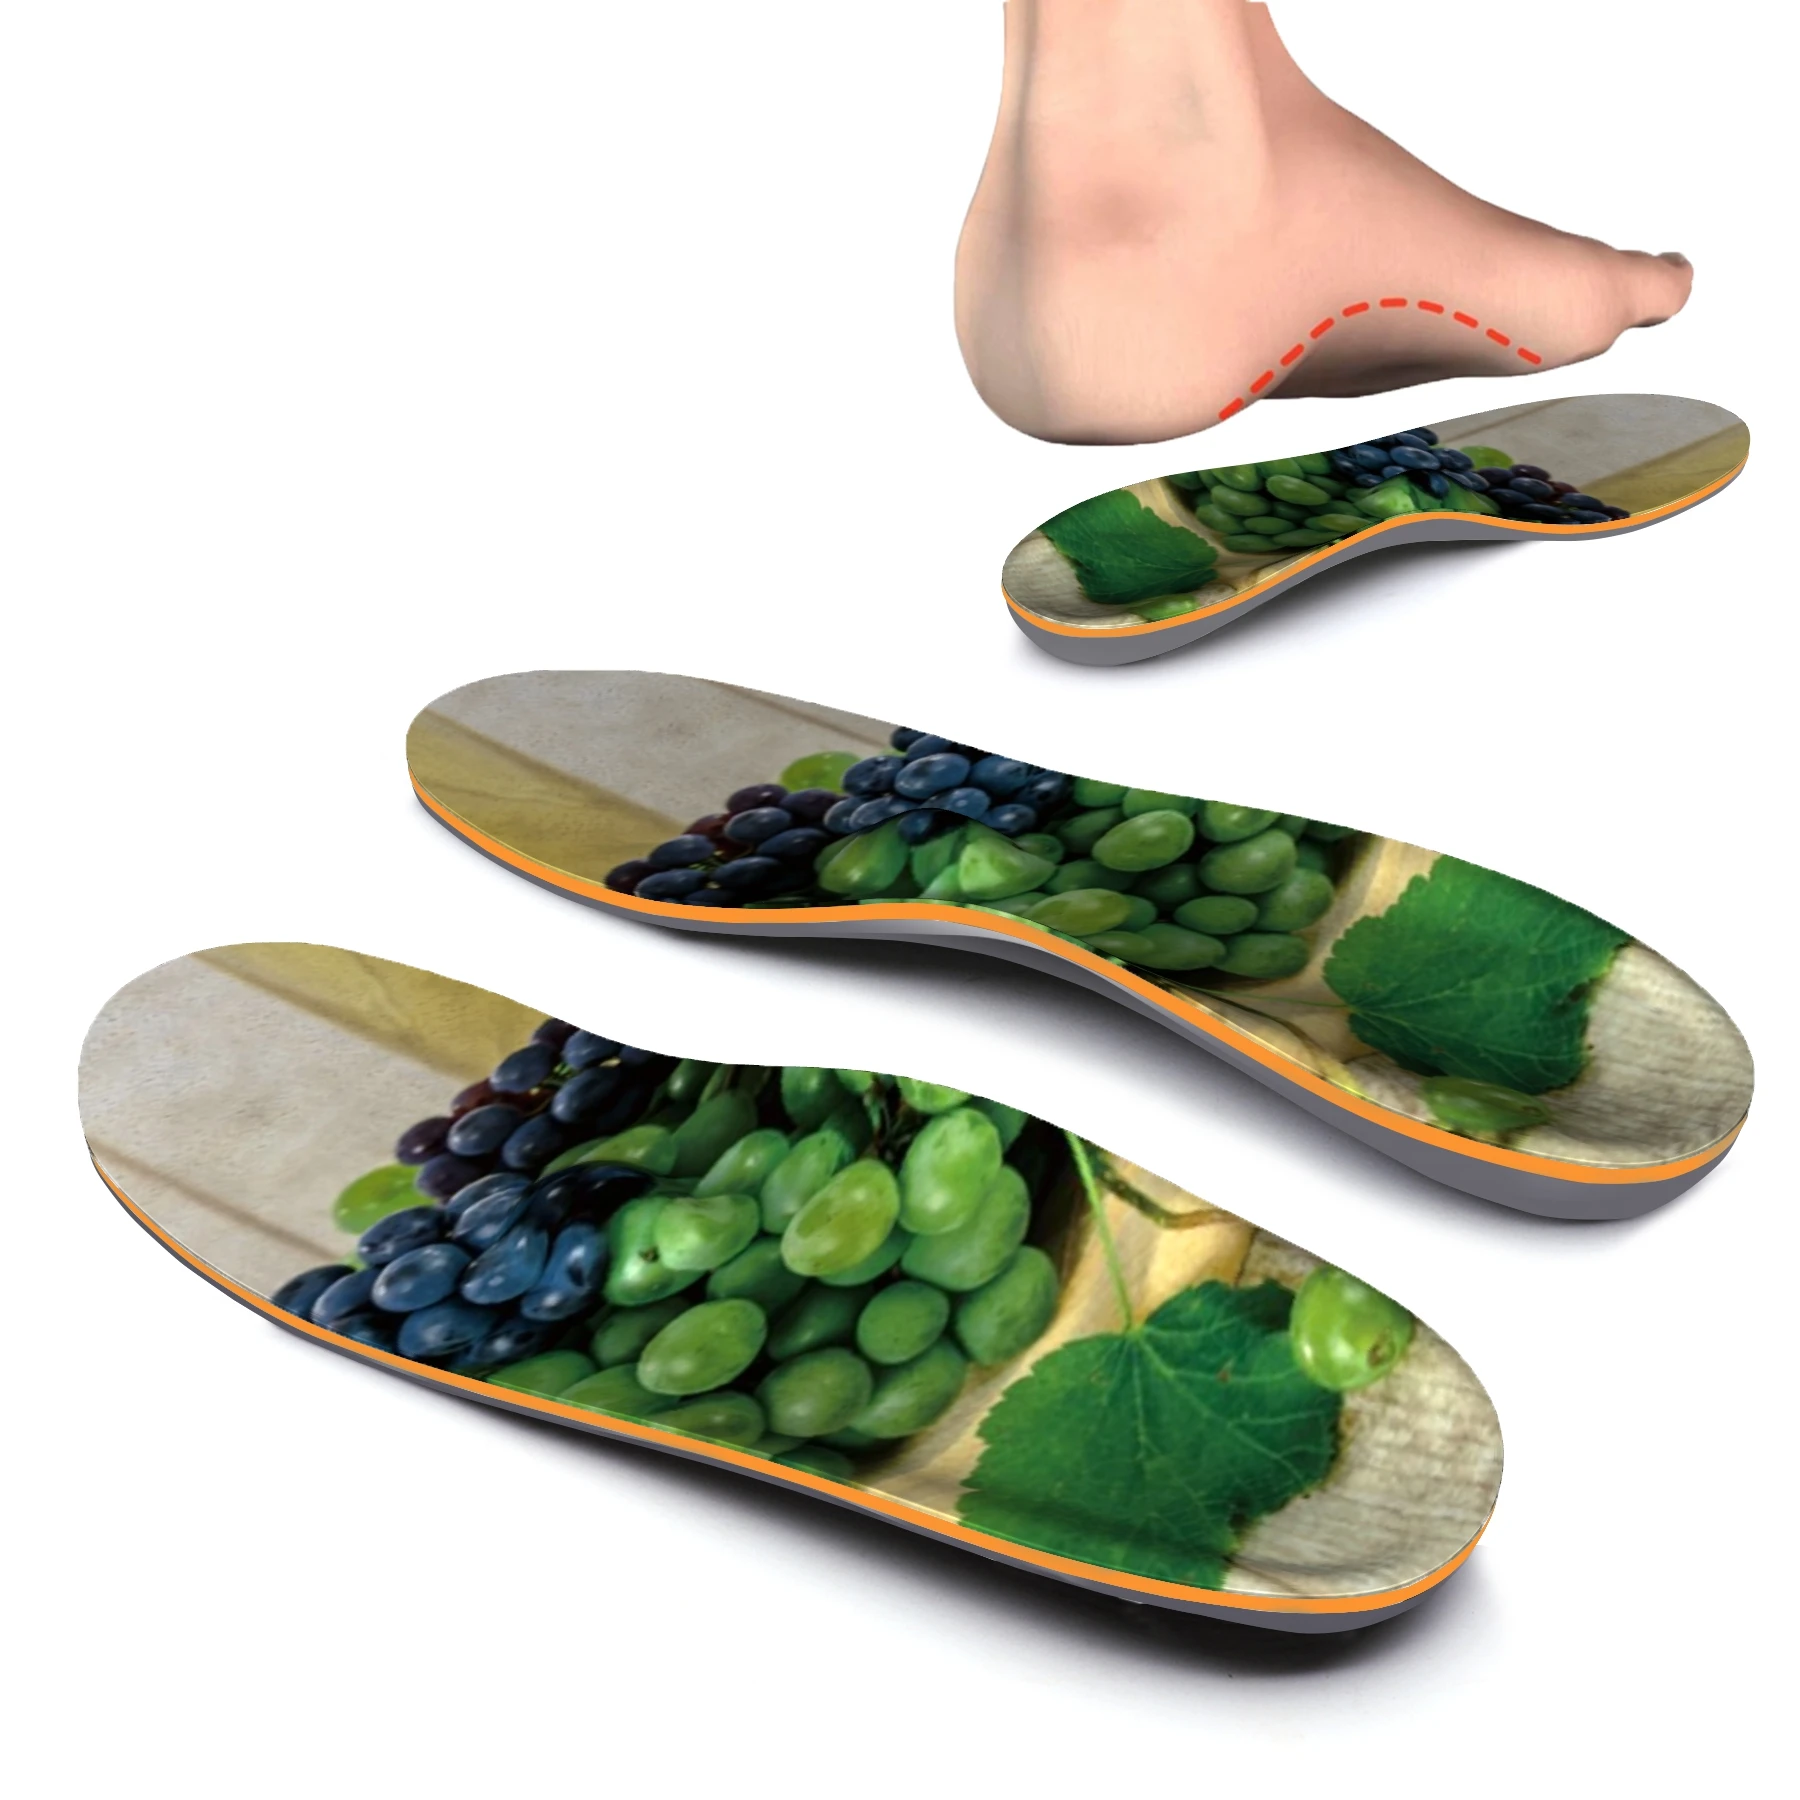 Fruit Pattern Orthotic Arch Support Insert, for Relieve Forefoot Pain, Plantar Fasciitis and Heel Pain Orthopedic Insoles